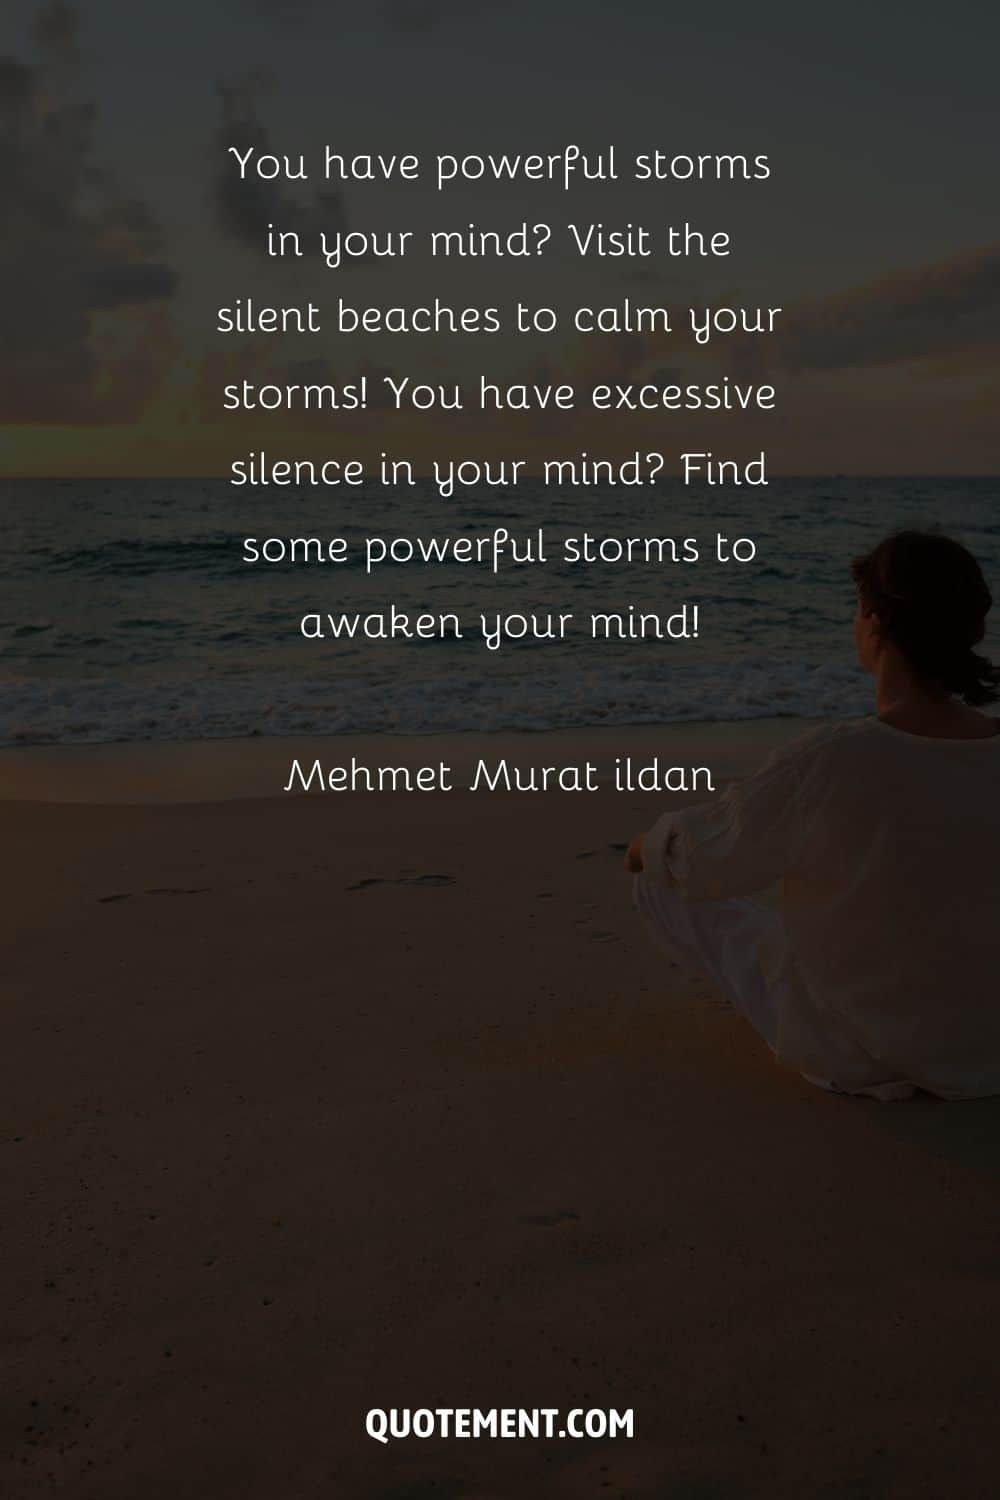 You have powerful storms in your mind Visit the silent beaches to calm your storms! You have excessive silence in your mind